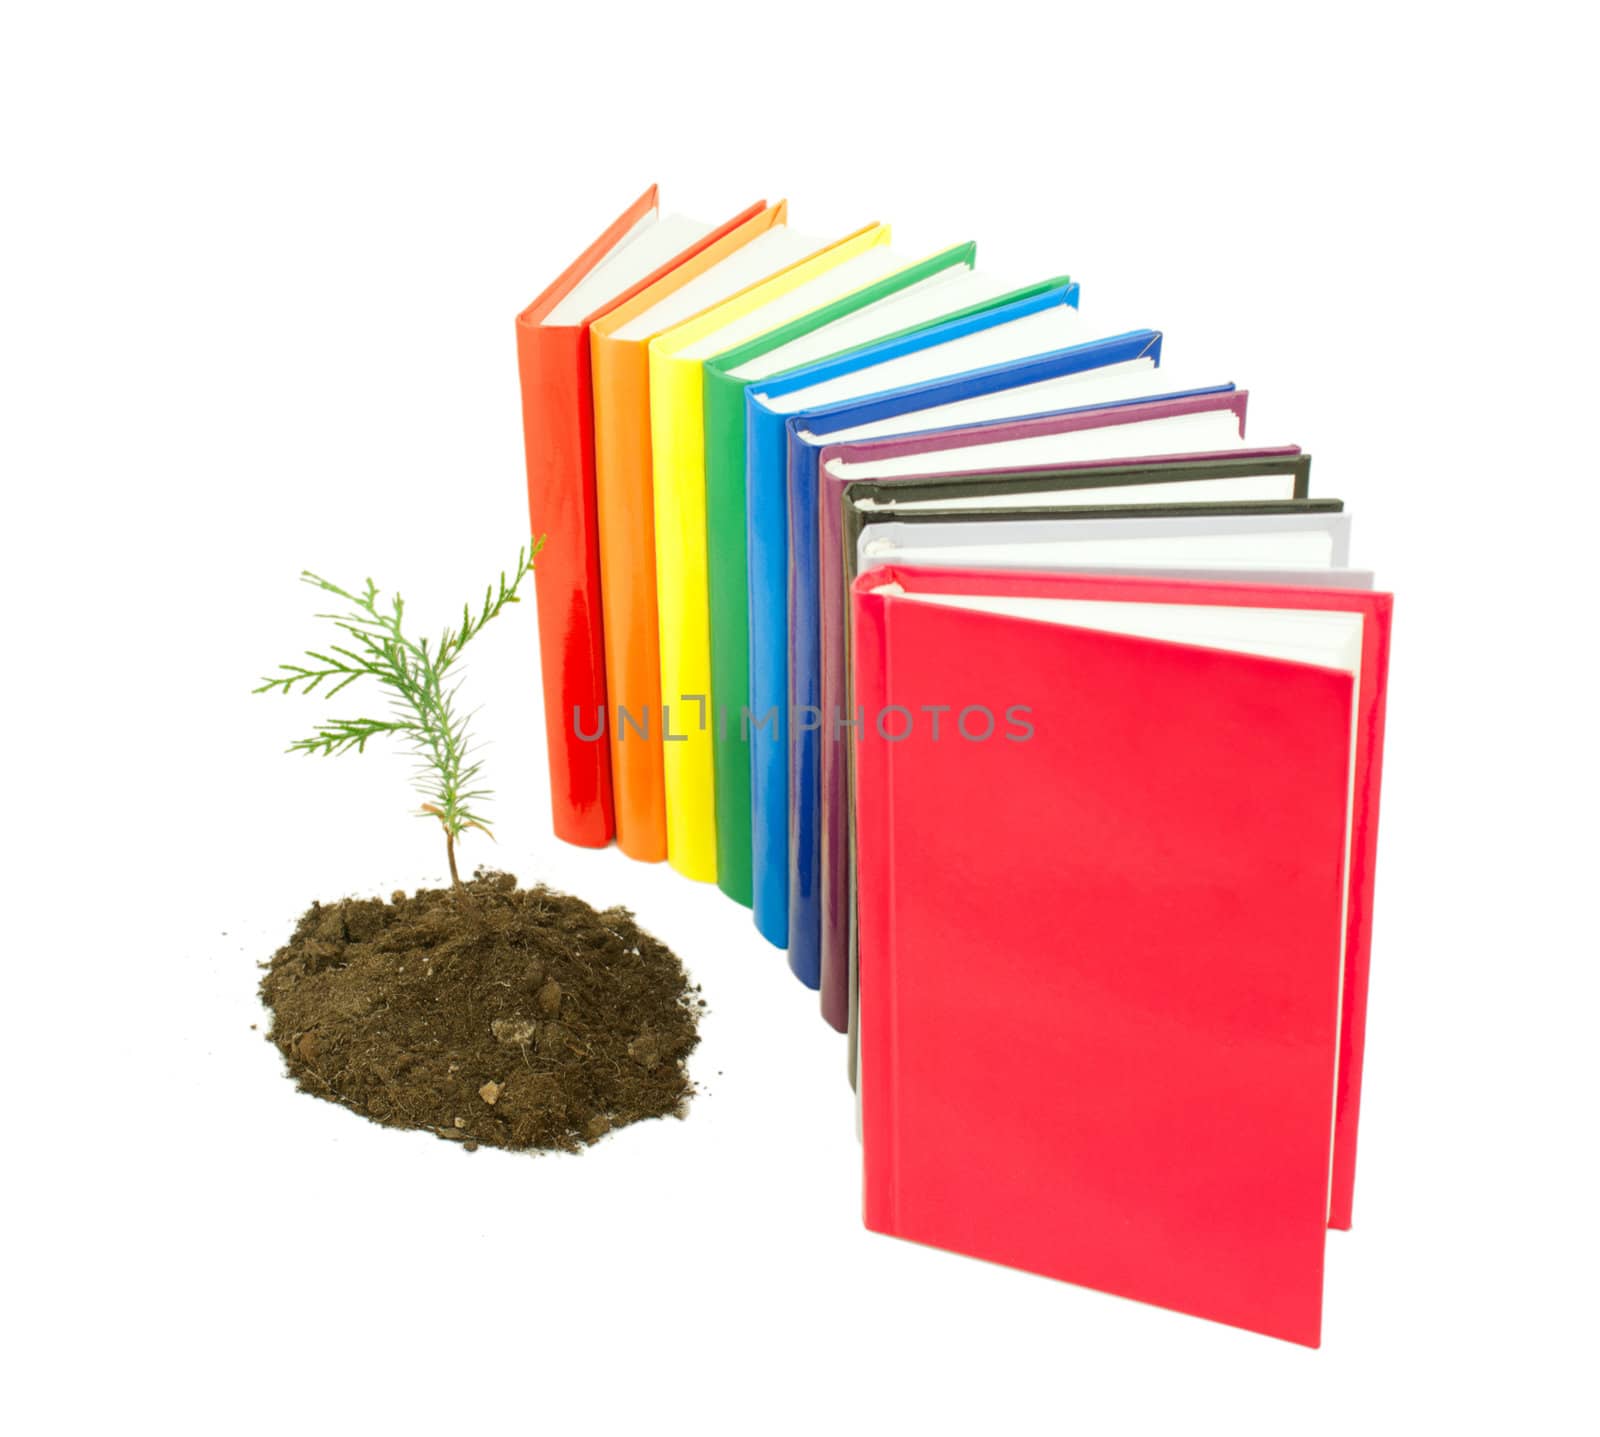 Seedling grown from the soil with row of books isolated on white